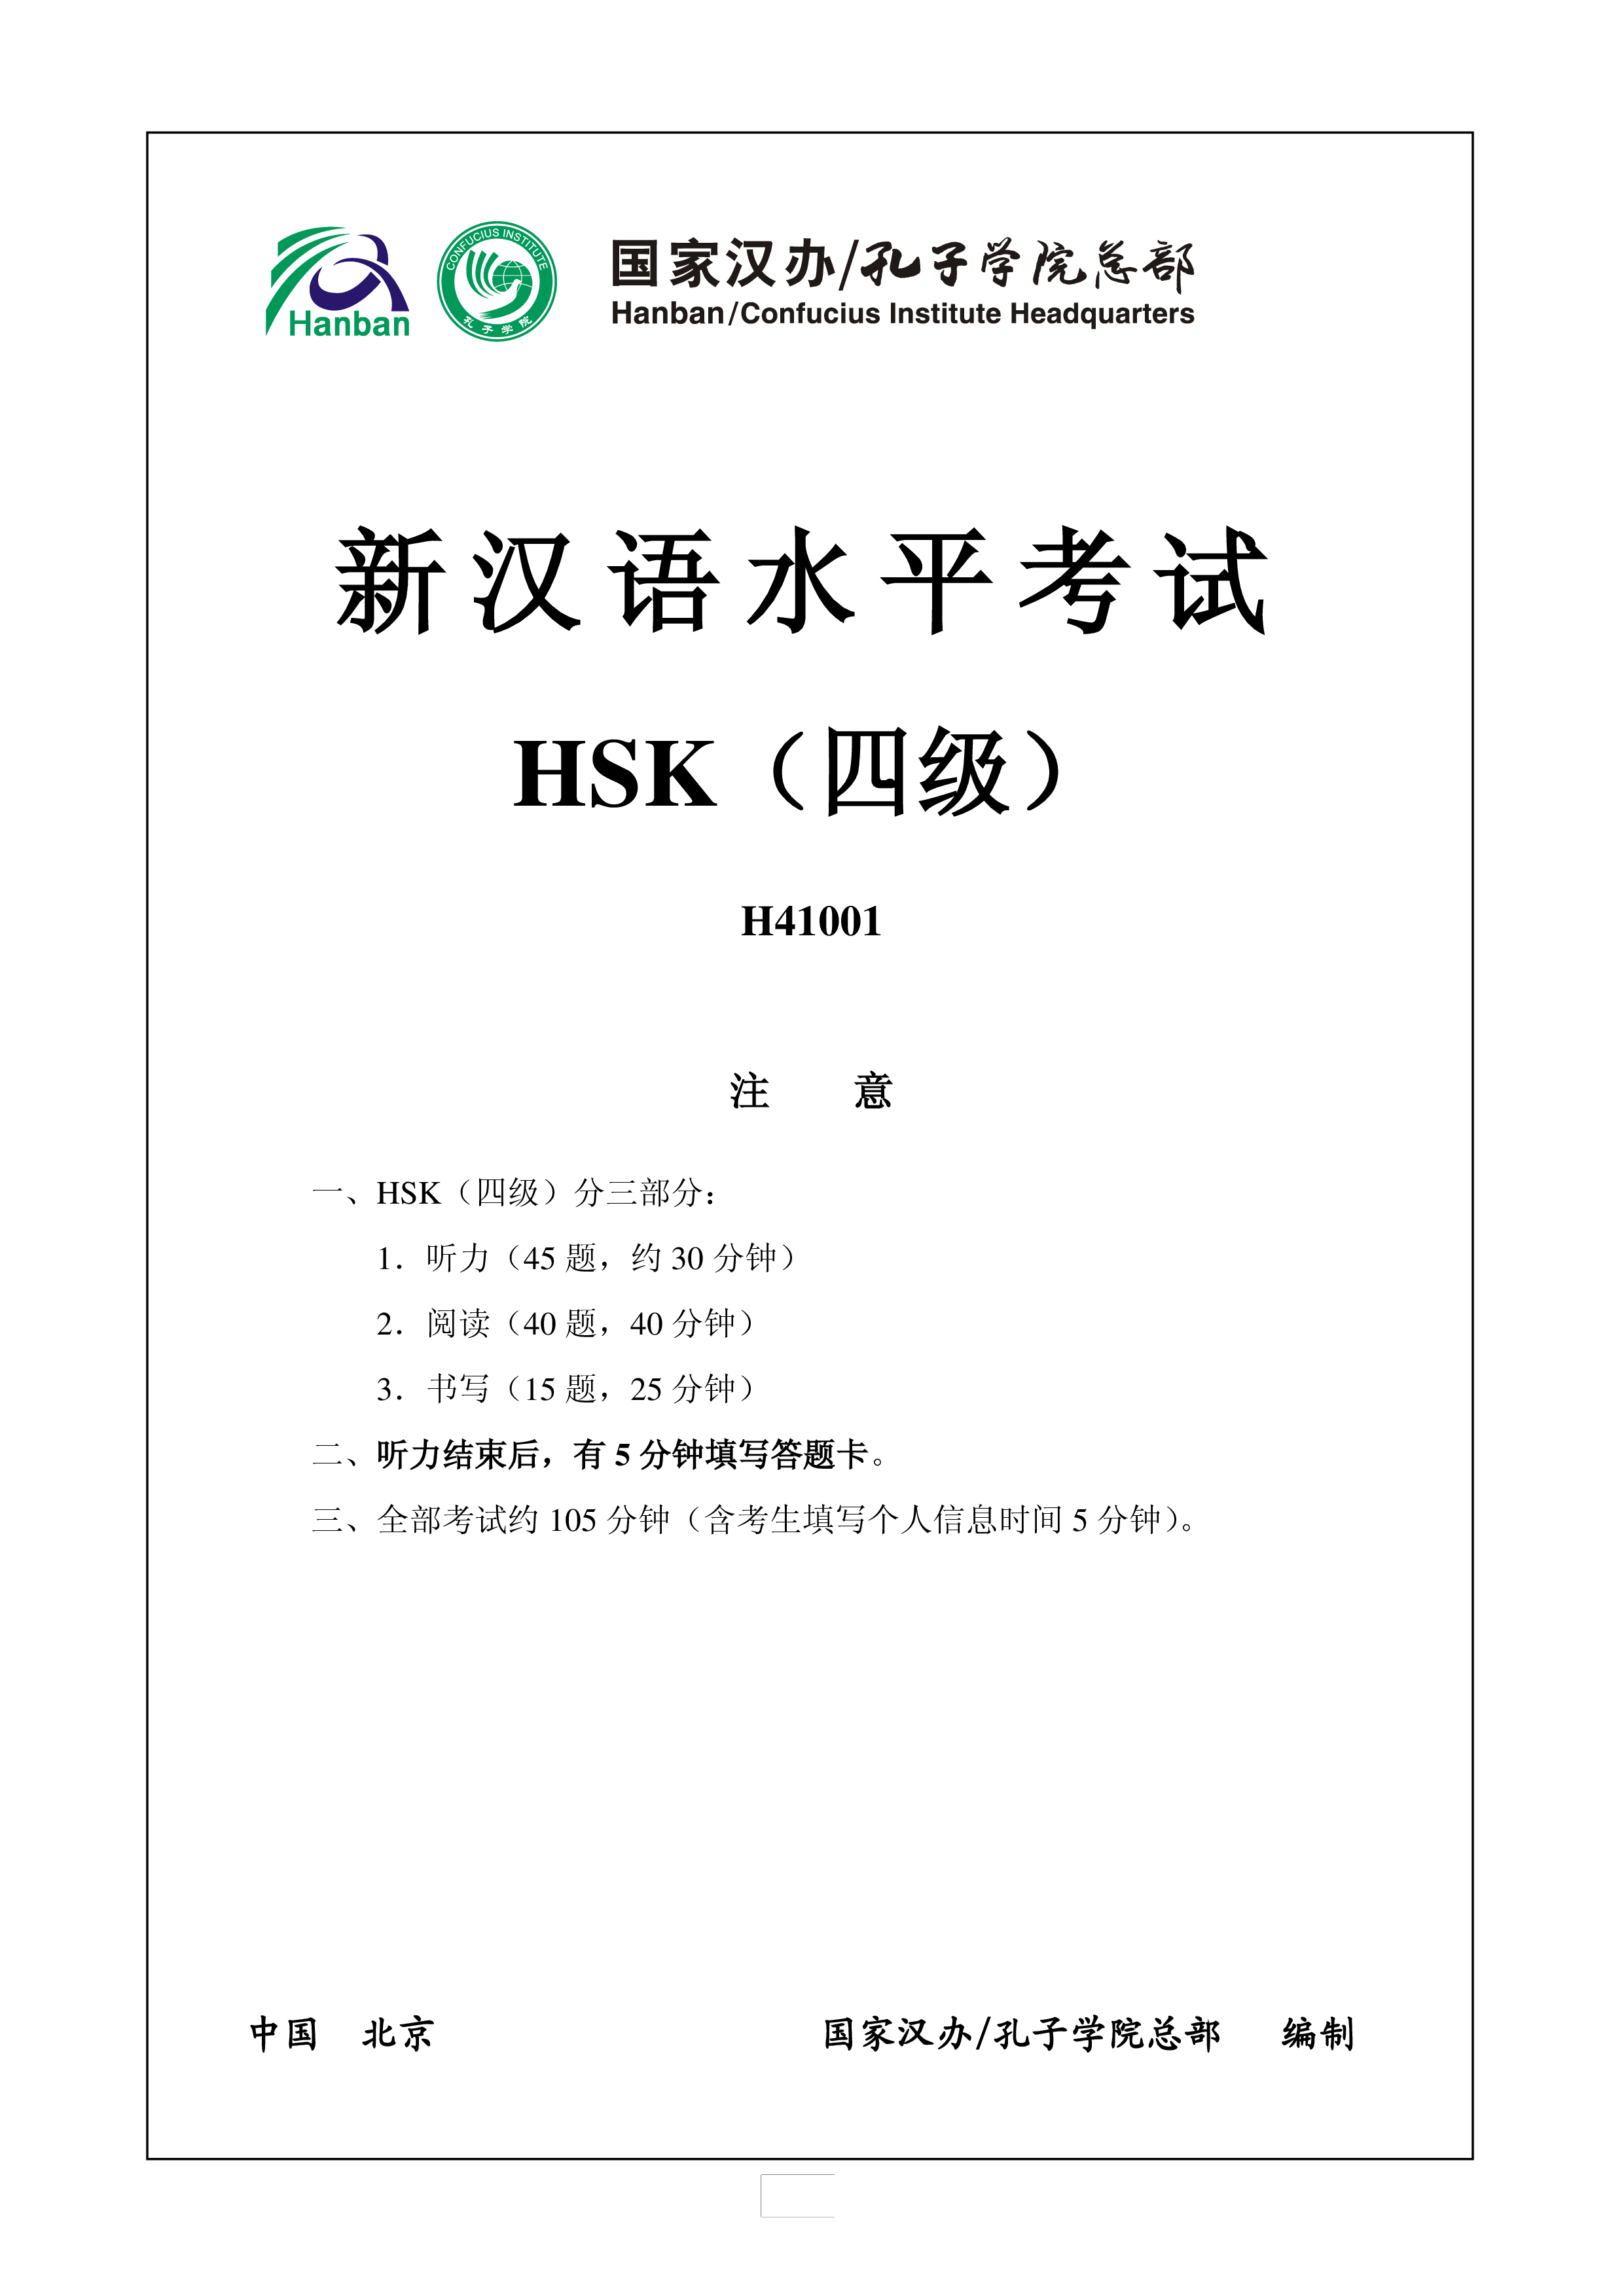 hsk4 chinese exam including answers # hsk h41001 template